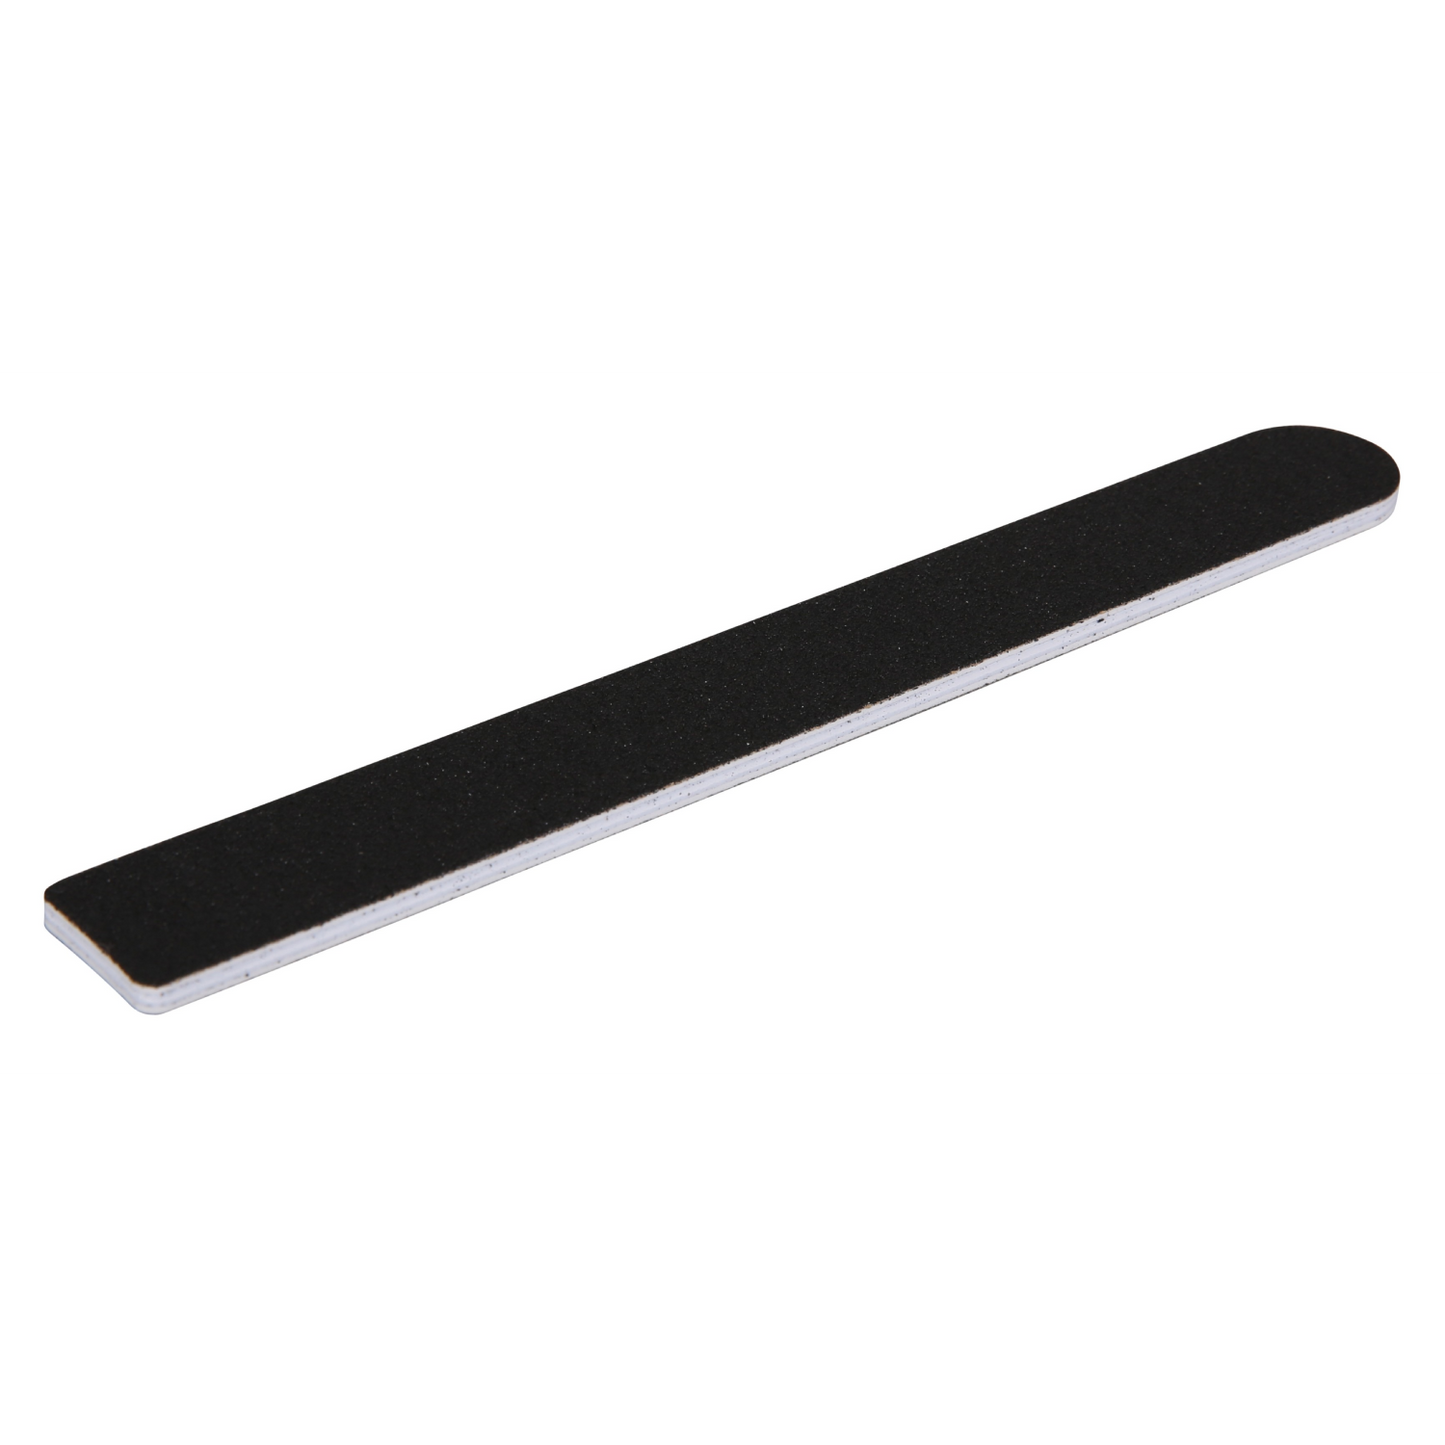 The Edge Duraboard Electra Nail File 100/180 - 10 Pack